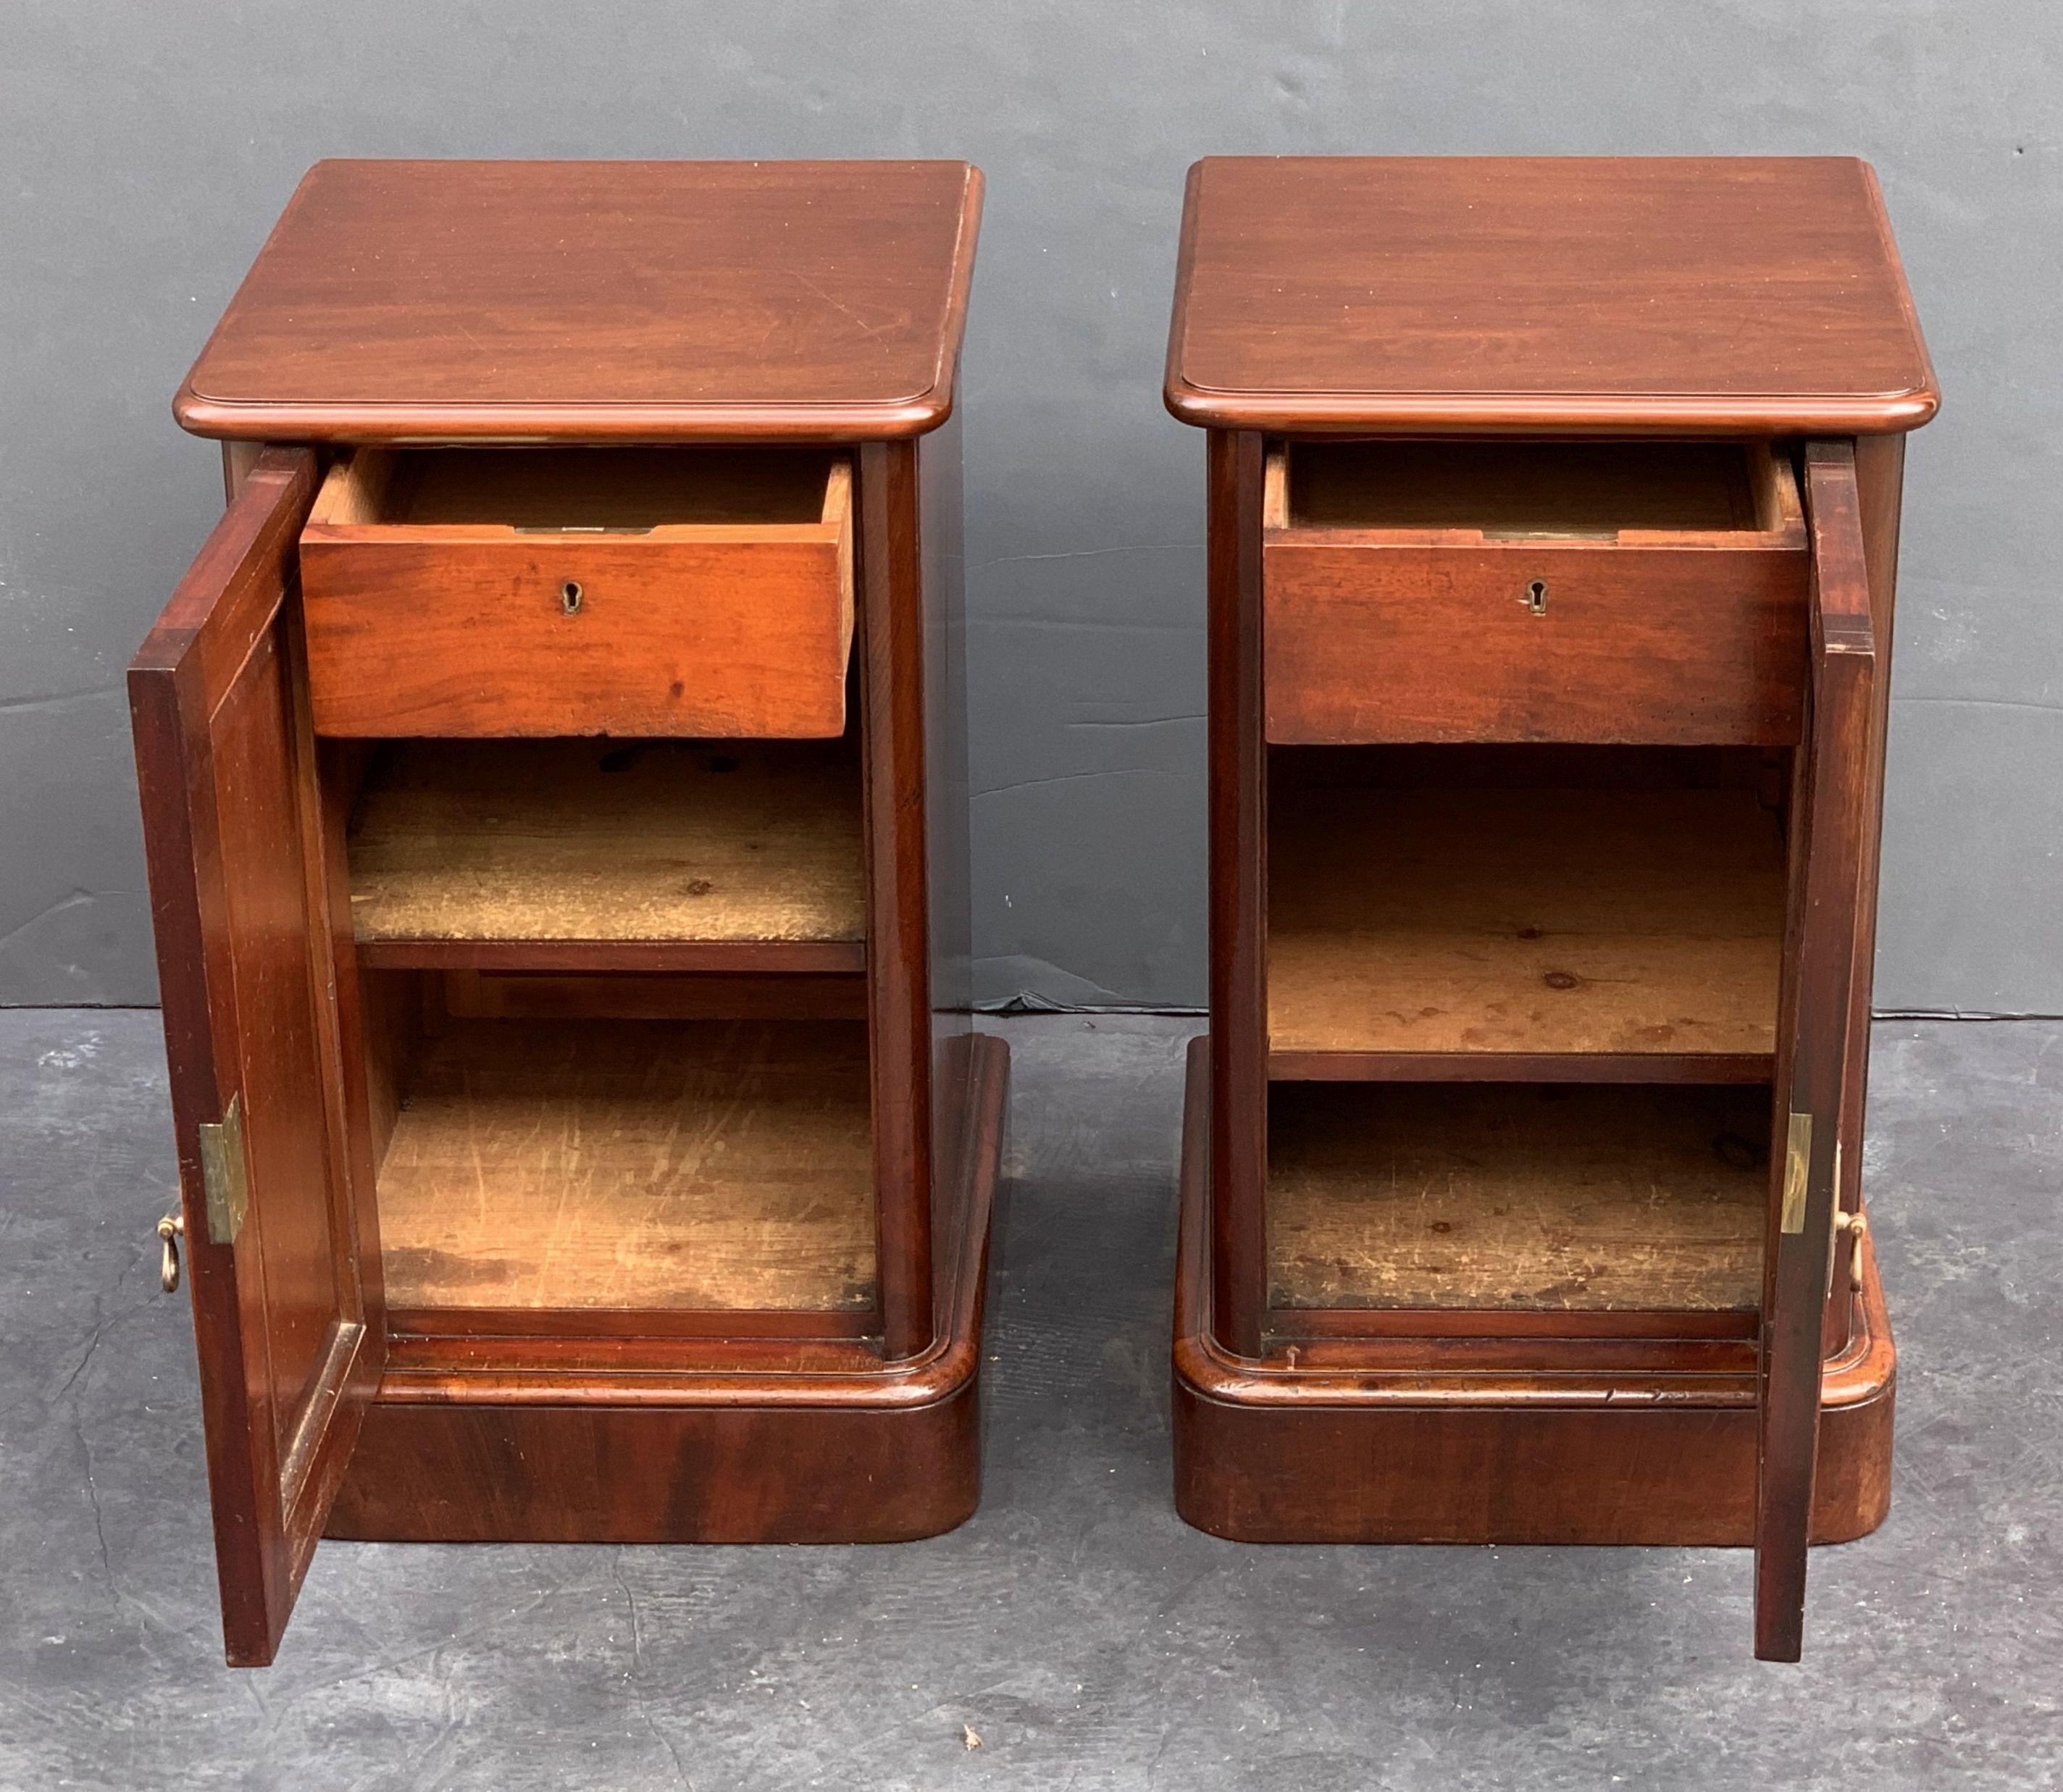 English Bedside Chests or Cabinet Nightstands of Mahogany, Priced as a Pair 12